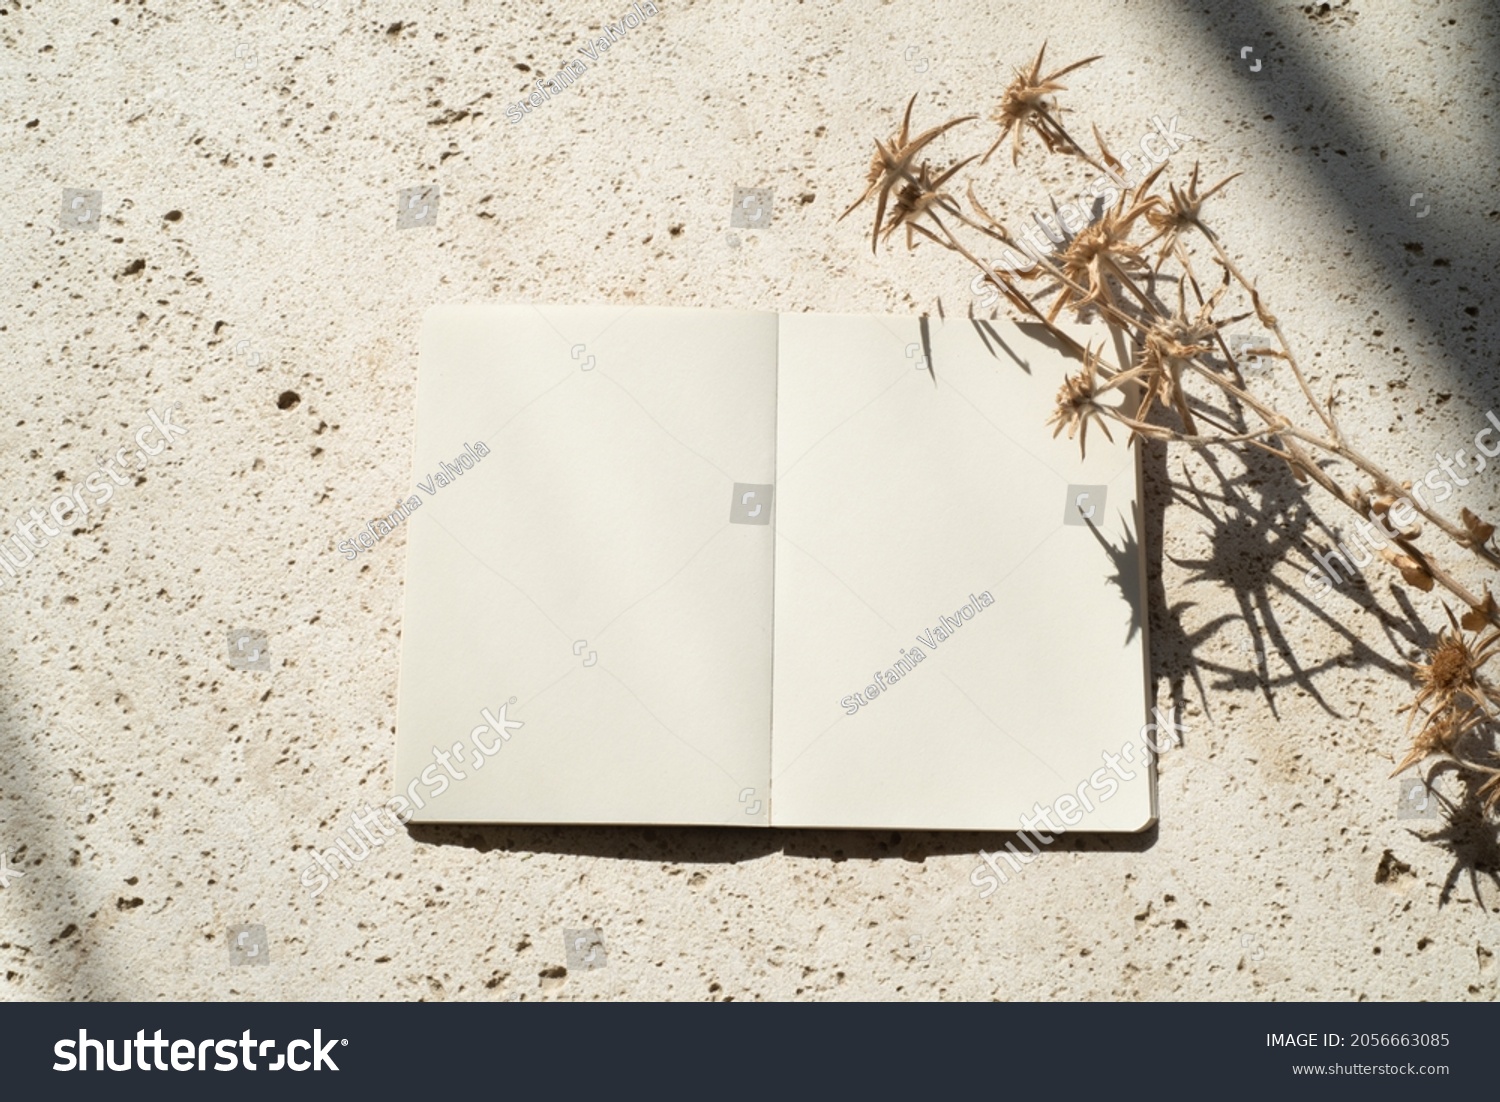 Autumn or winter wedding. Birthday stationery composition.Blank open diary with dry floral element. Harsh shadow play on travertine background. Composition in daylight, copy space, top view #2056663085